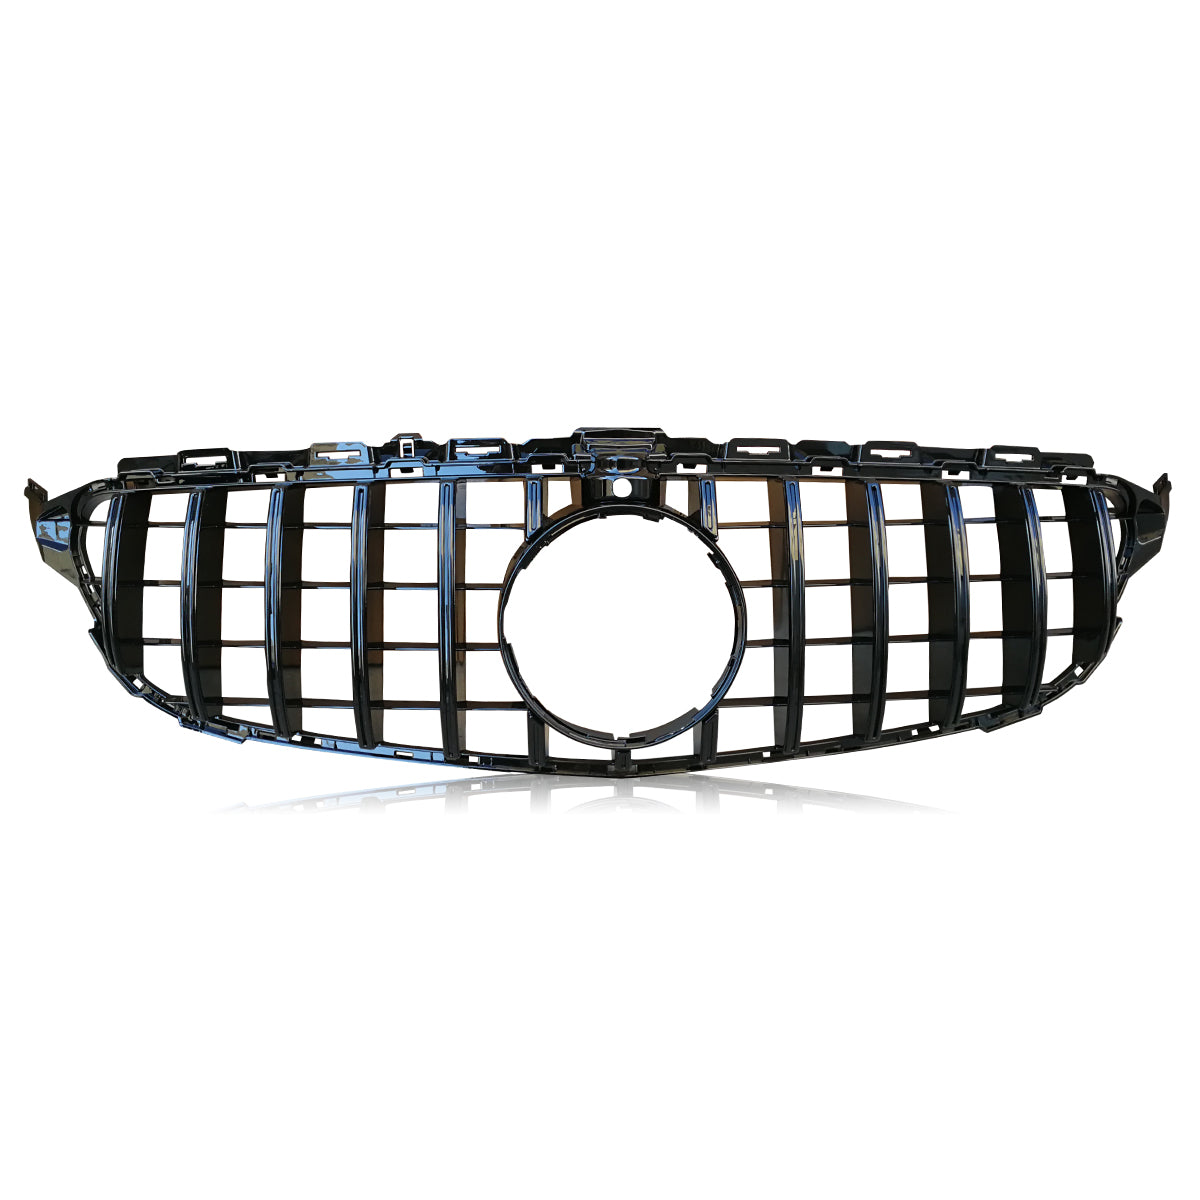 GT STYLE GRILLE FOR C-CLASS W205 2015-2018